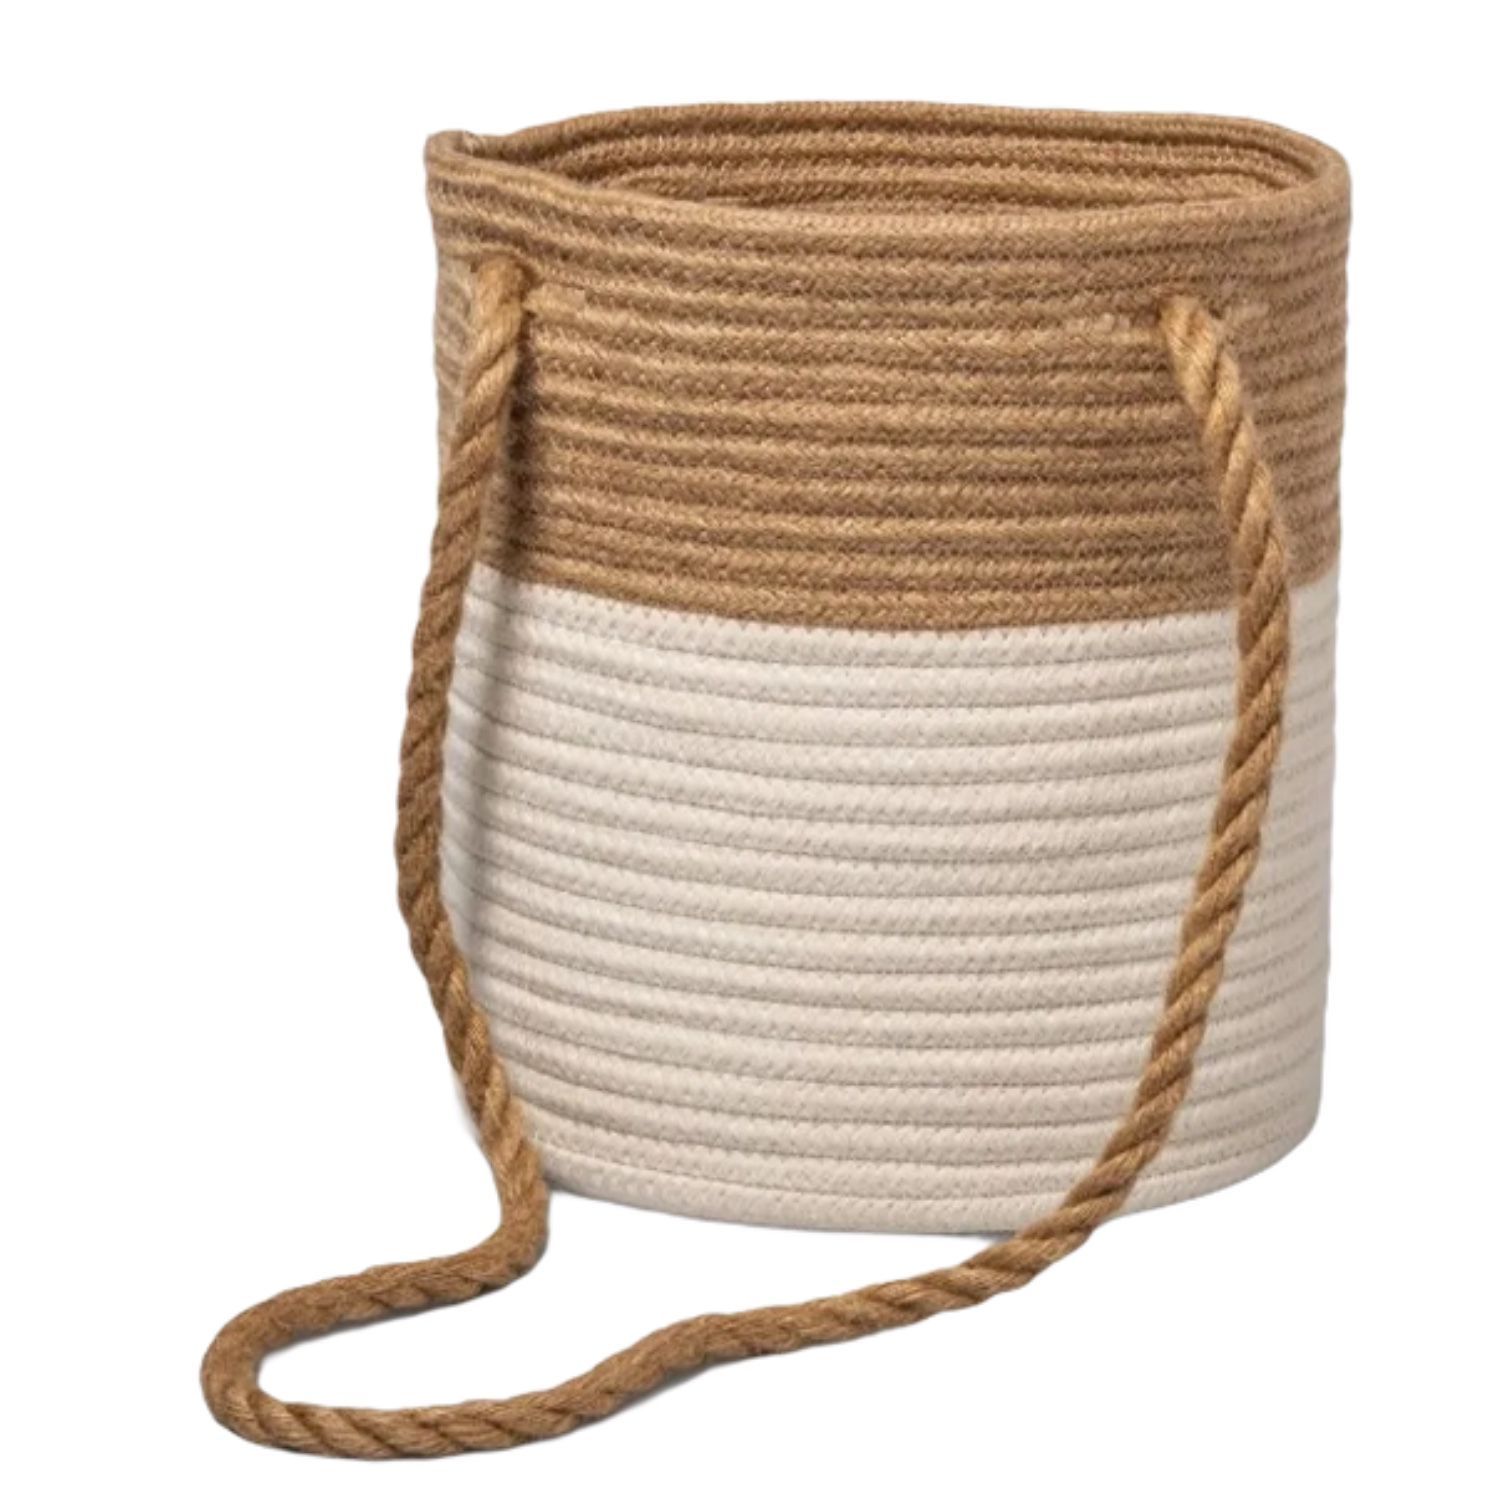 Coiled Rope Hanging Plant Planter Basket New Brown